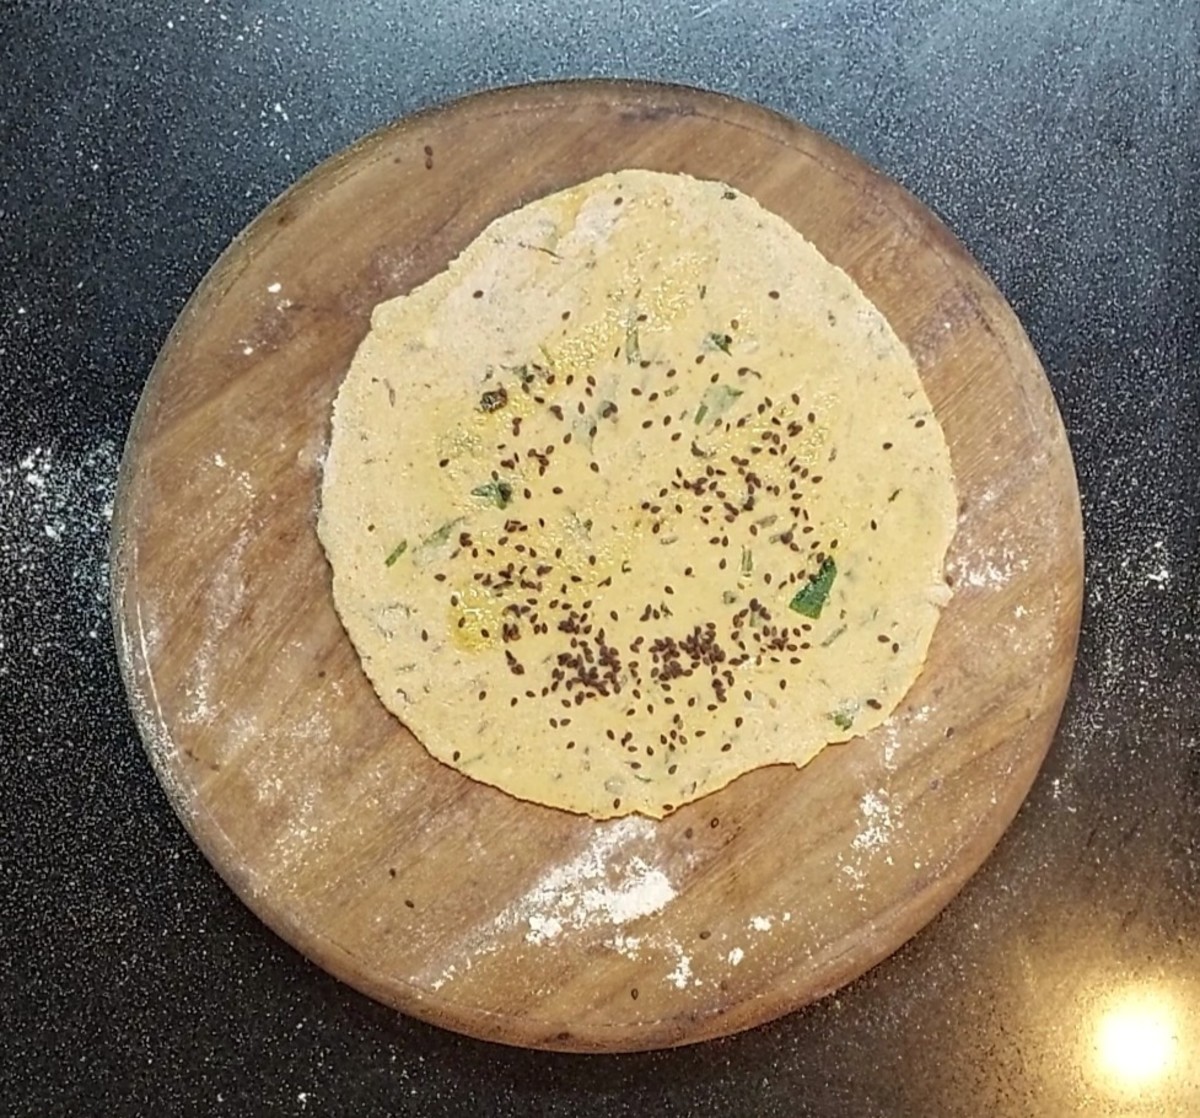 Use a rolling pin to roll the dough into a round paratha. Drizzle a few drops of ghee and spread it over the top. Sprinkle a few sesame seeds.